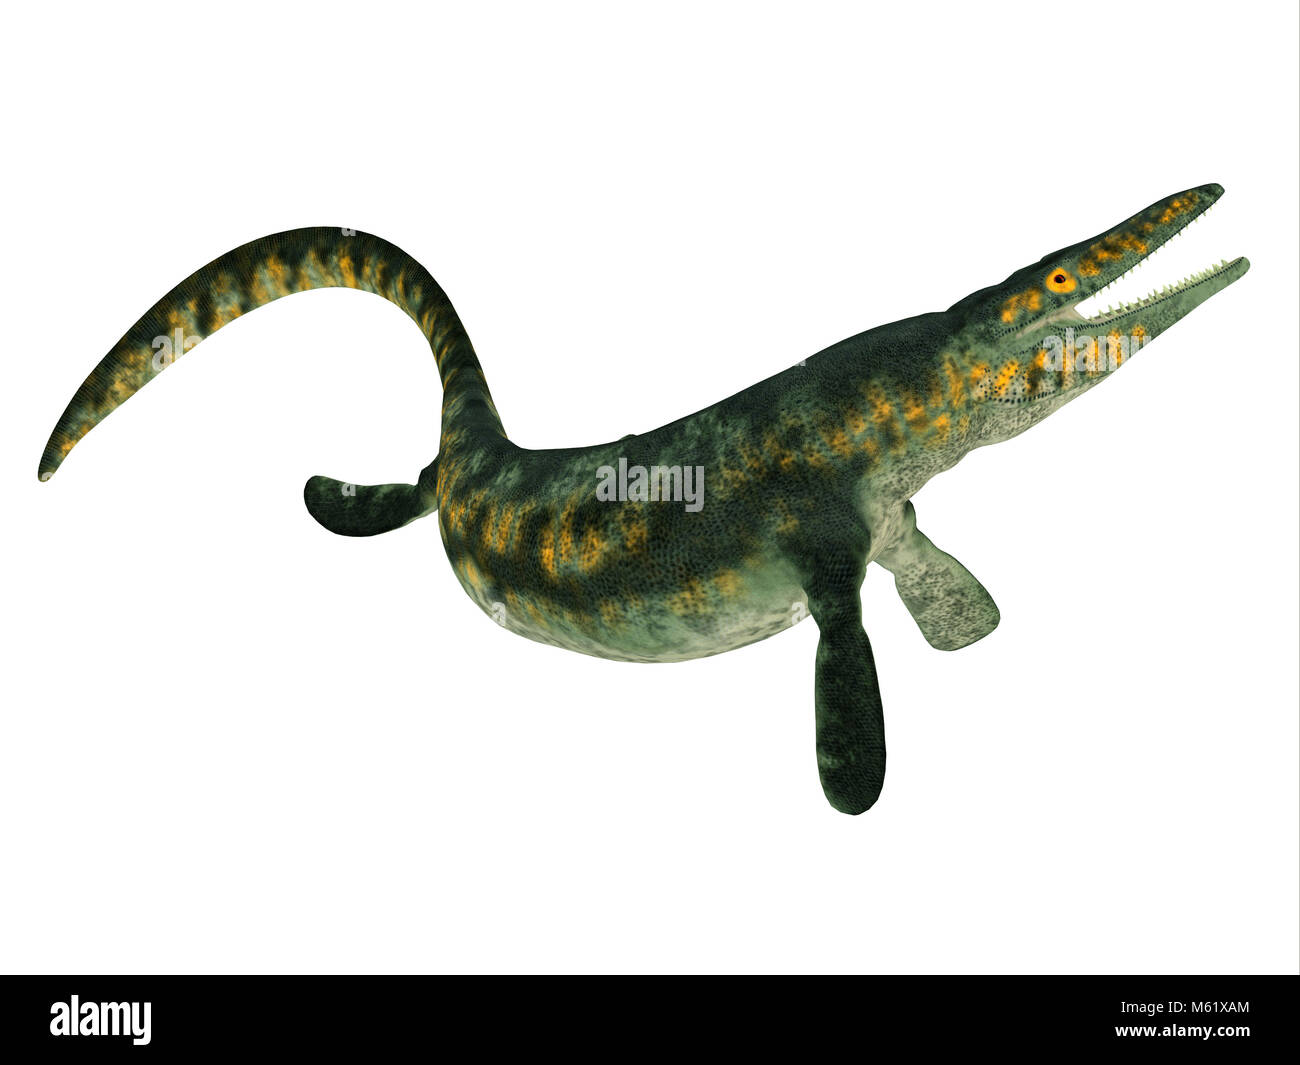 Tylosaurus Marine Reptile - Tylosaurus was a carnivorous marine reptile that lived in the North America Western Interior Seaway during the Cretaceous. Stock Photo